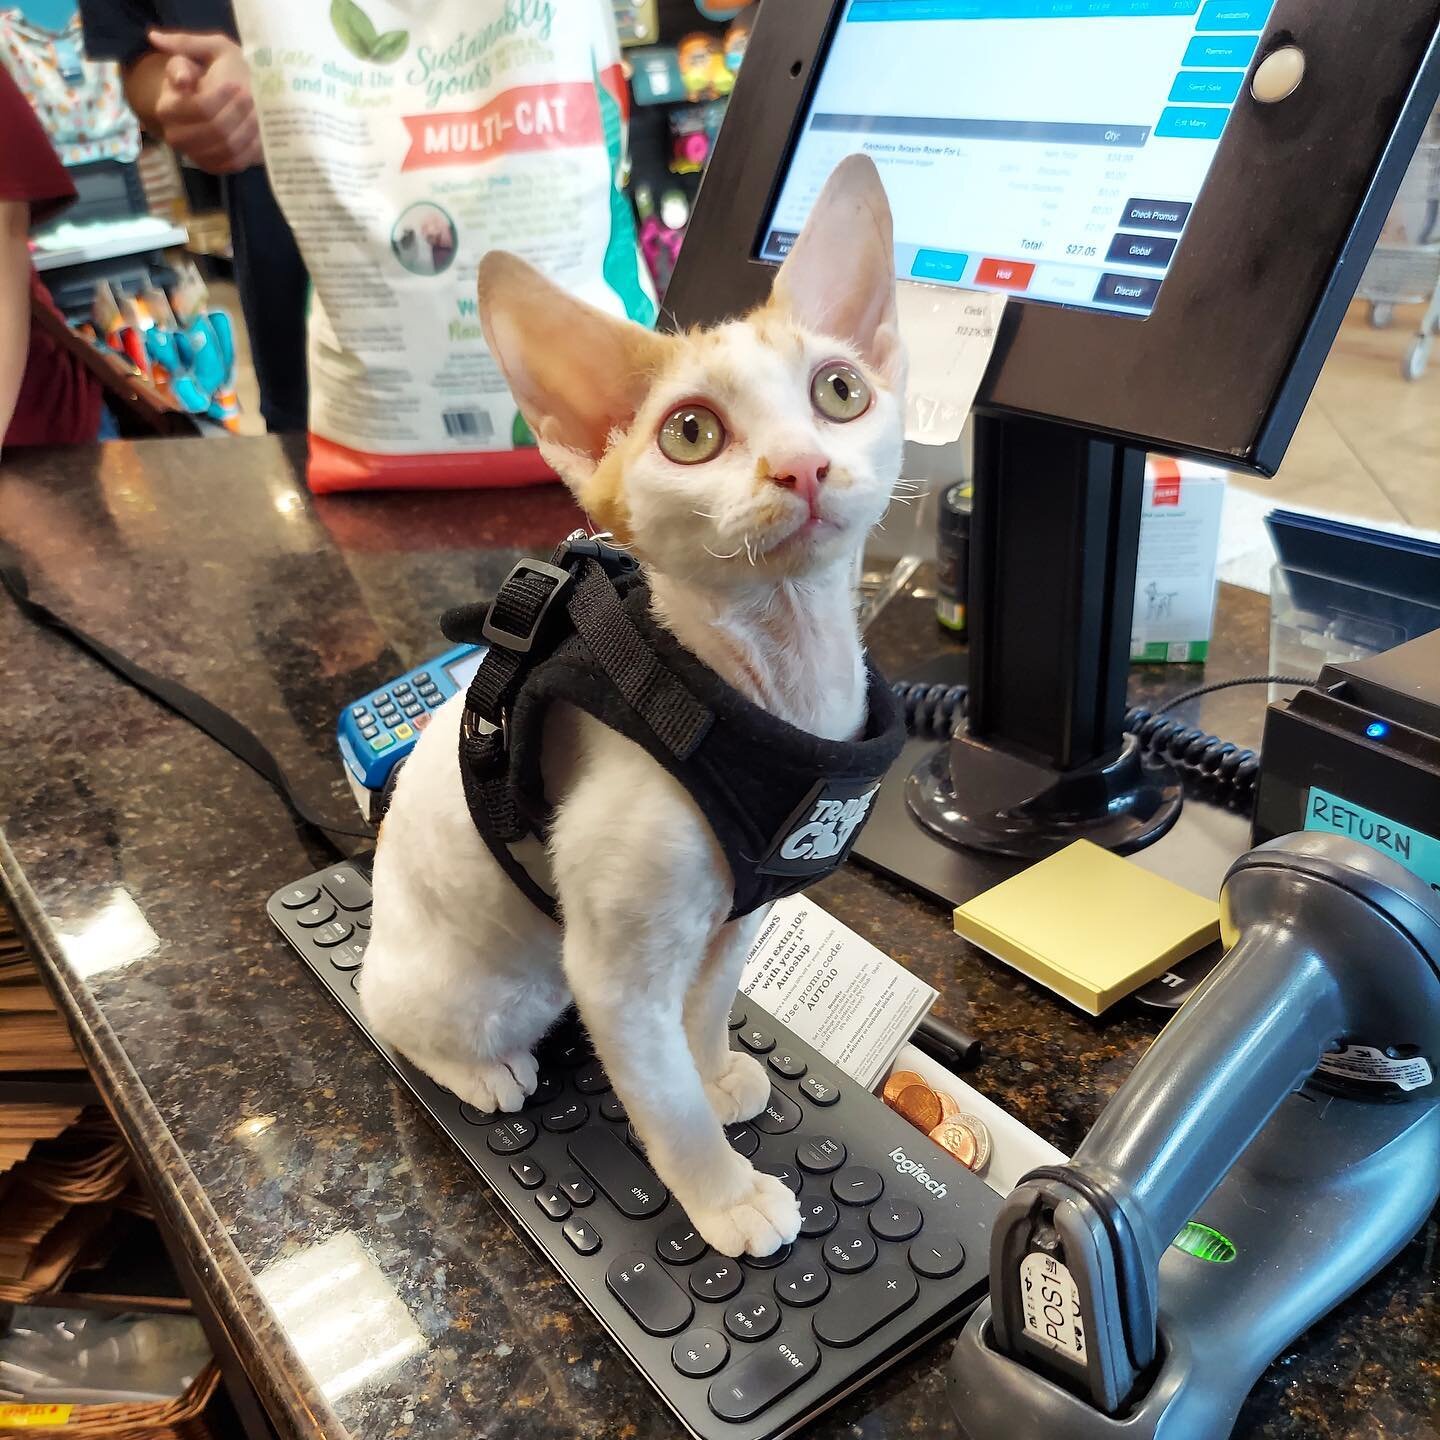 &ldquo;I don&rsquo;t care what my Hooman said, add more catnip onto the order right meow.&rdquo; - Mina the spunky 5 month old kitten at our Circle C store
&bull;
&bull;
#austin #atx #atxcats #austincats #atxlife #tomlinsonsfeed #texas #austintx #aus